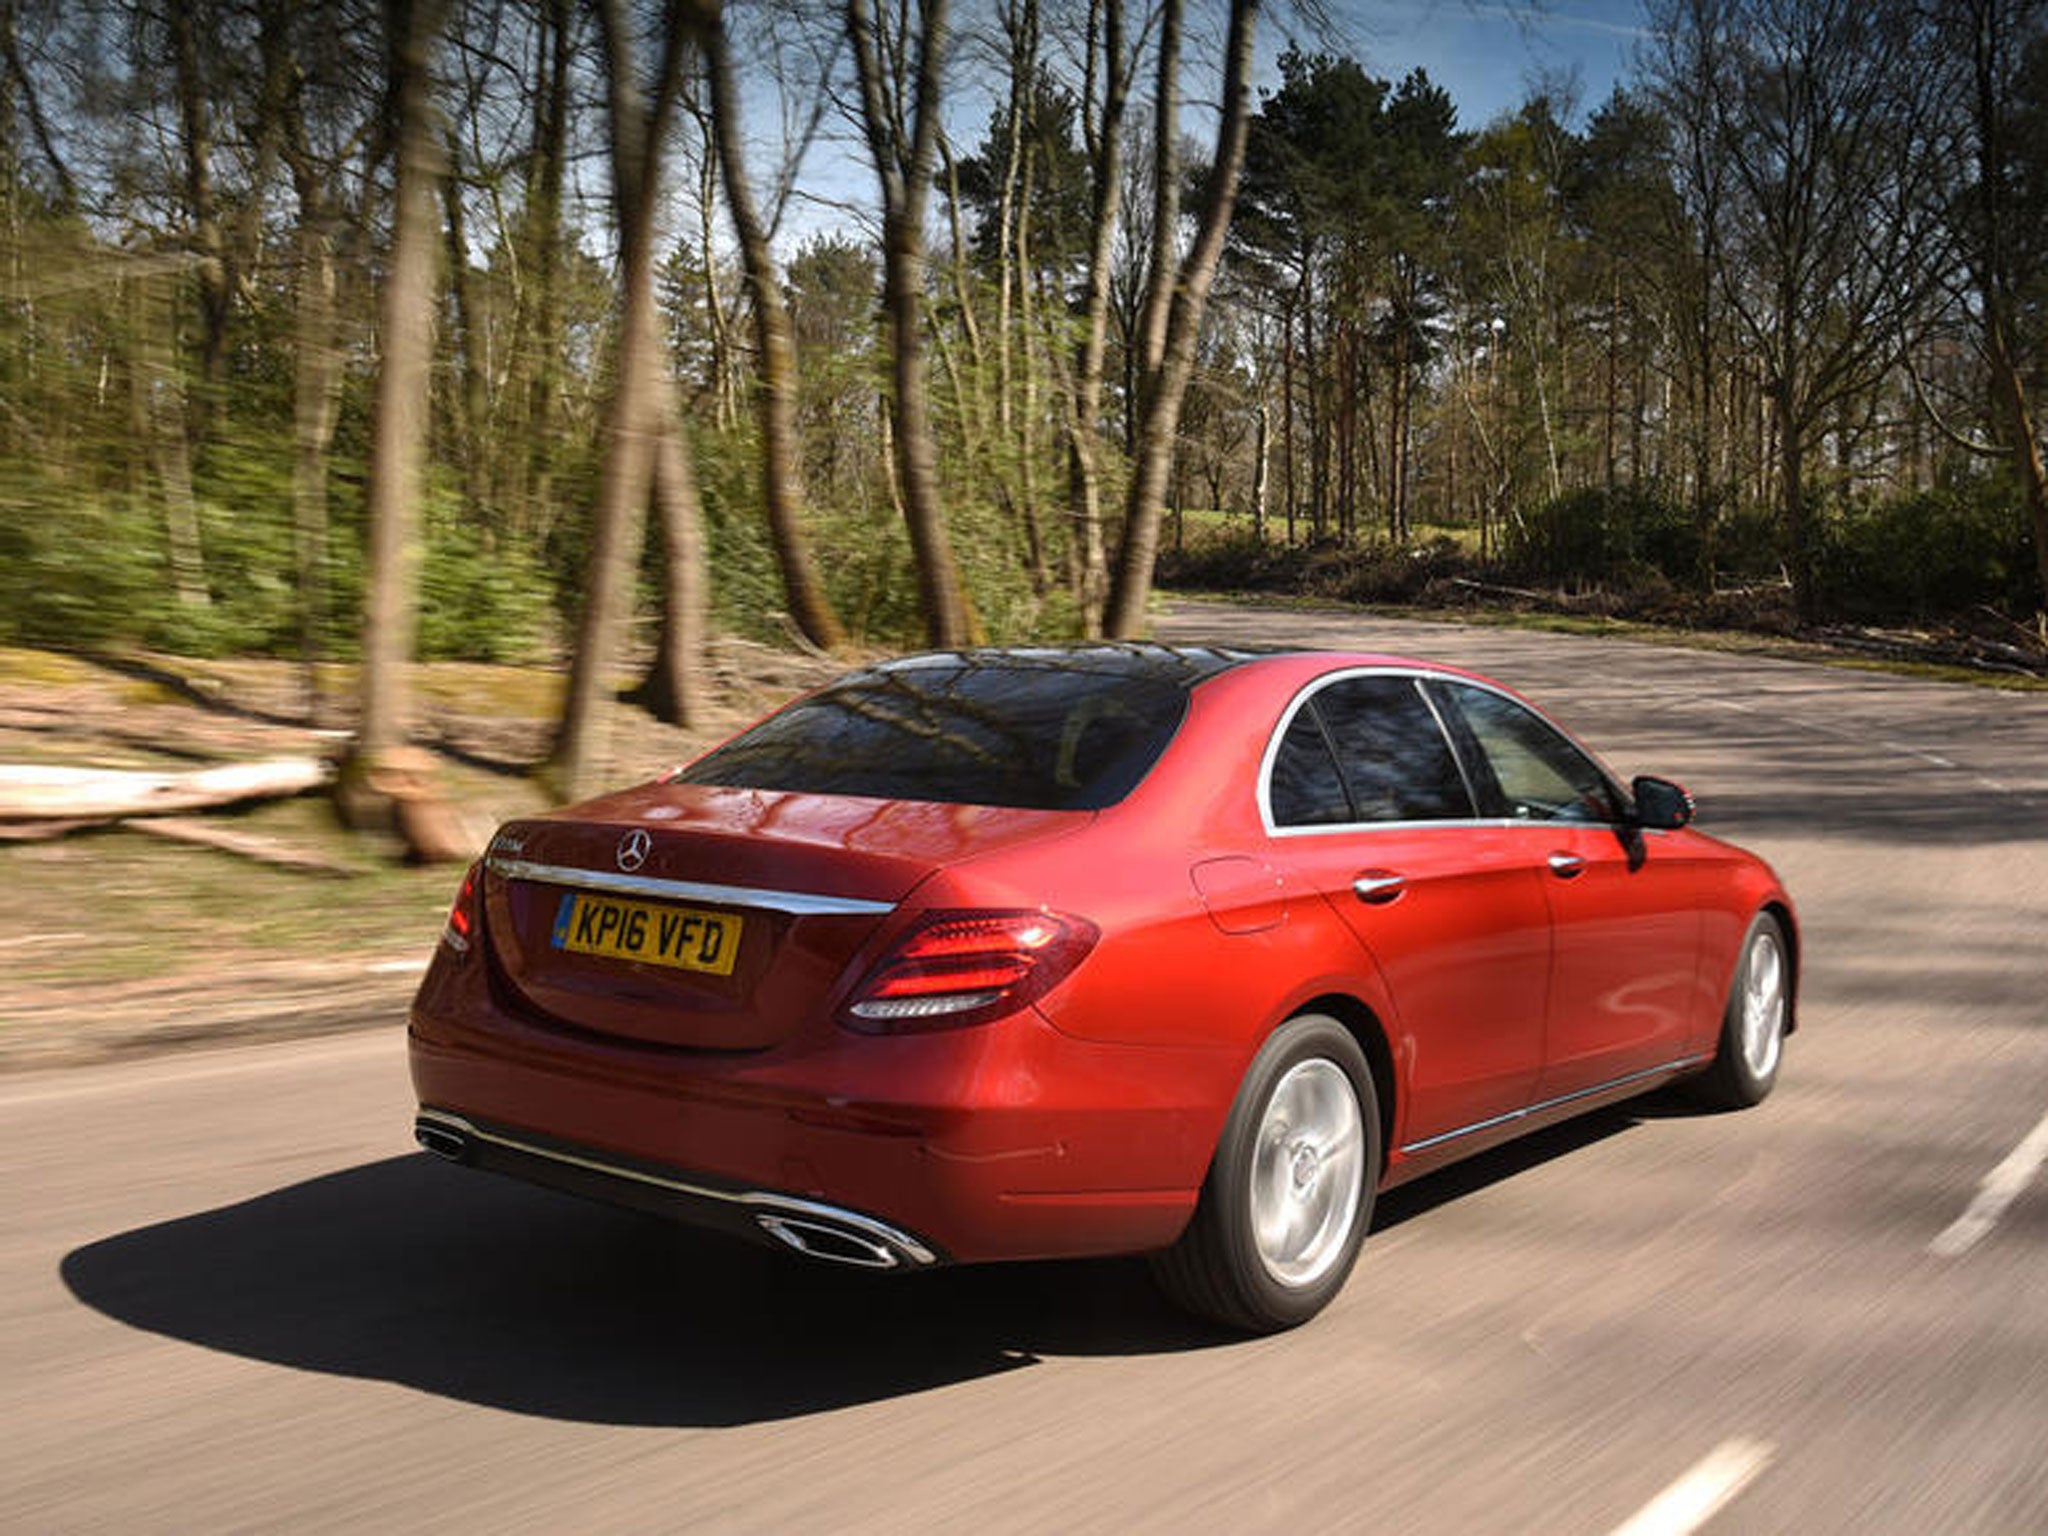 The E-Class is focused simply on being a luxury saloon